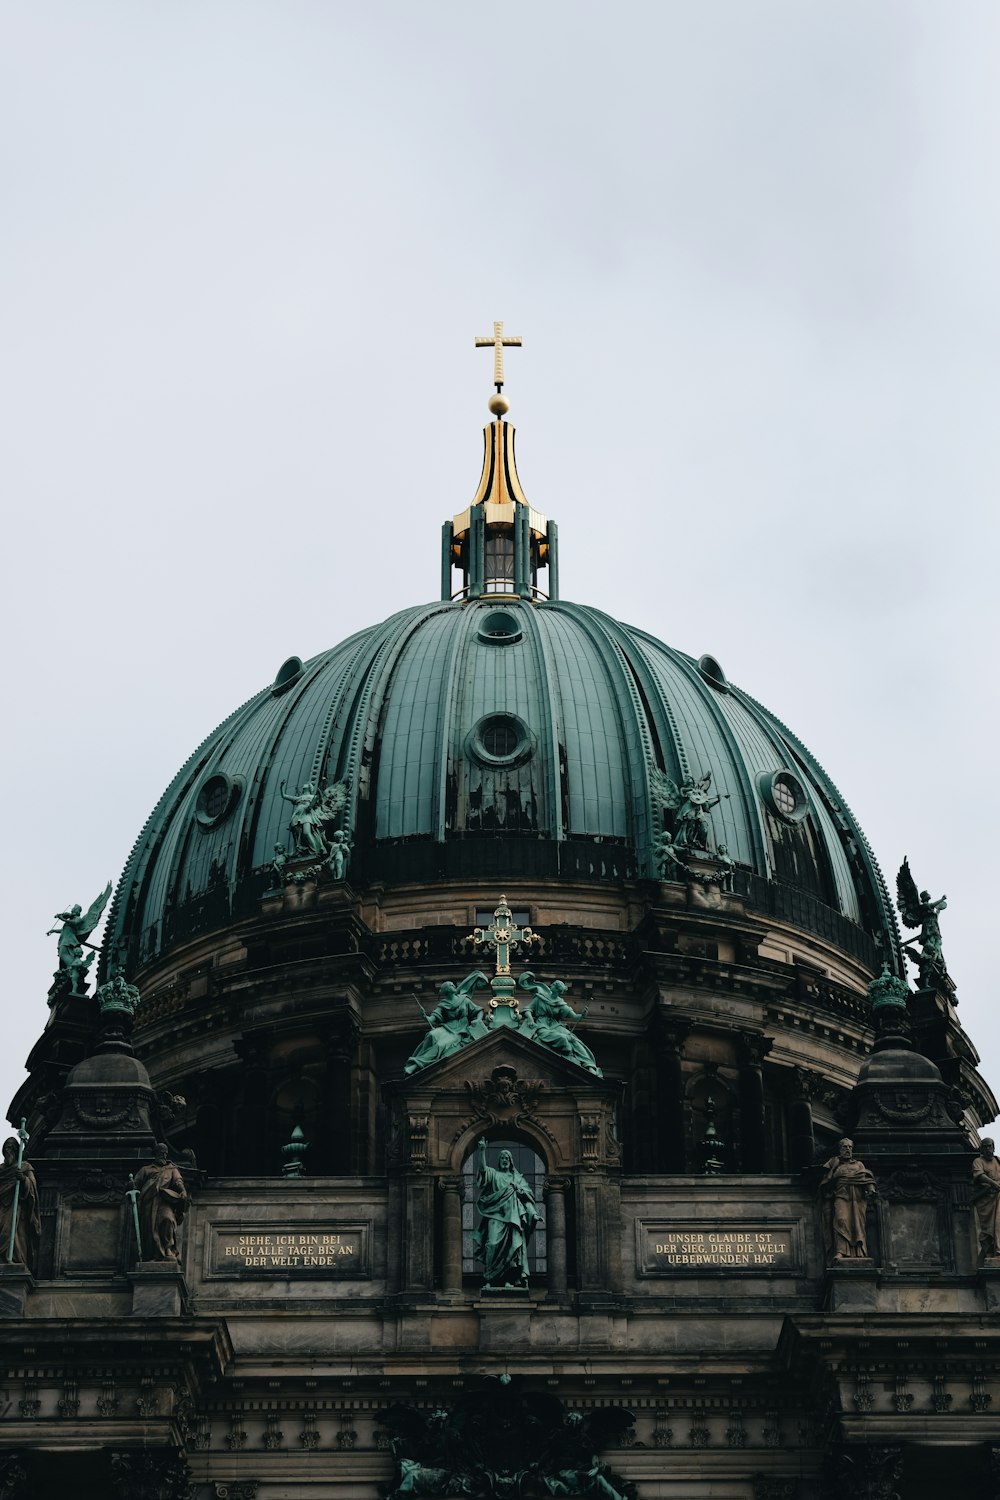 a large dome with a cross on top of it